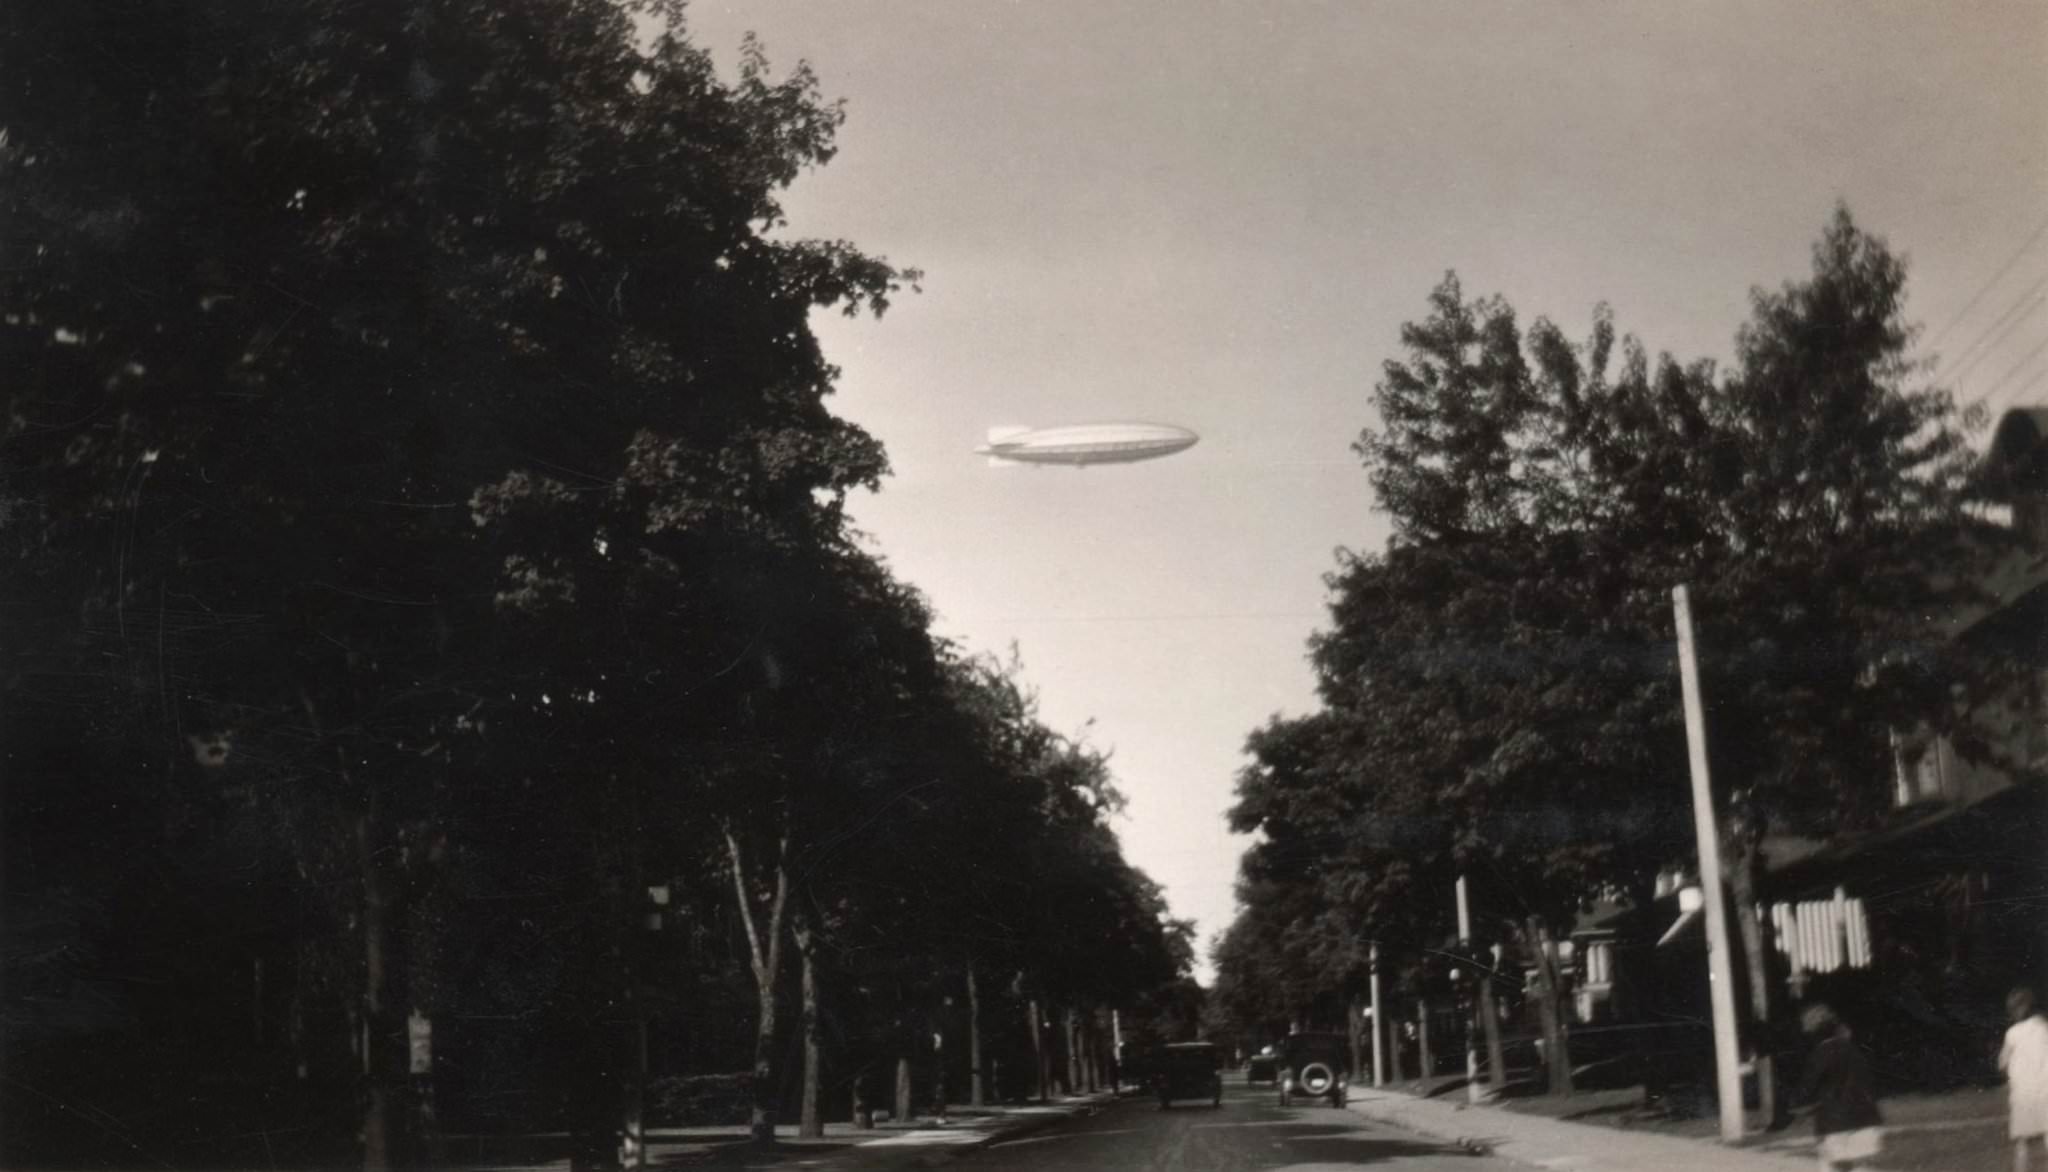 60 Langley, looking west from Riverdale." His Majesty's Airship R-100 over Toronto on Aug 11, 1930.